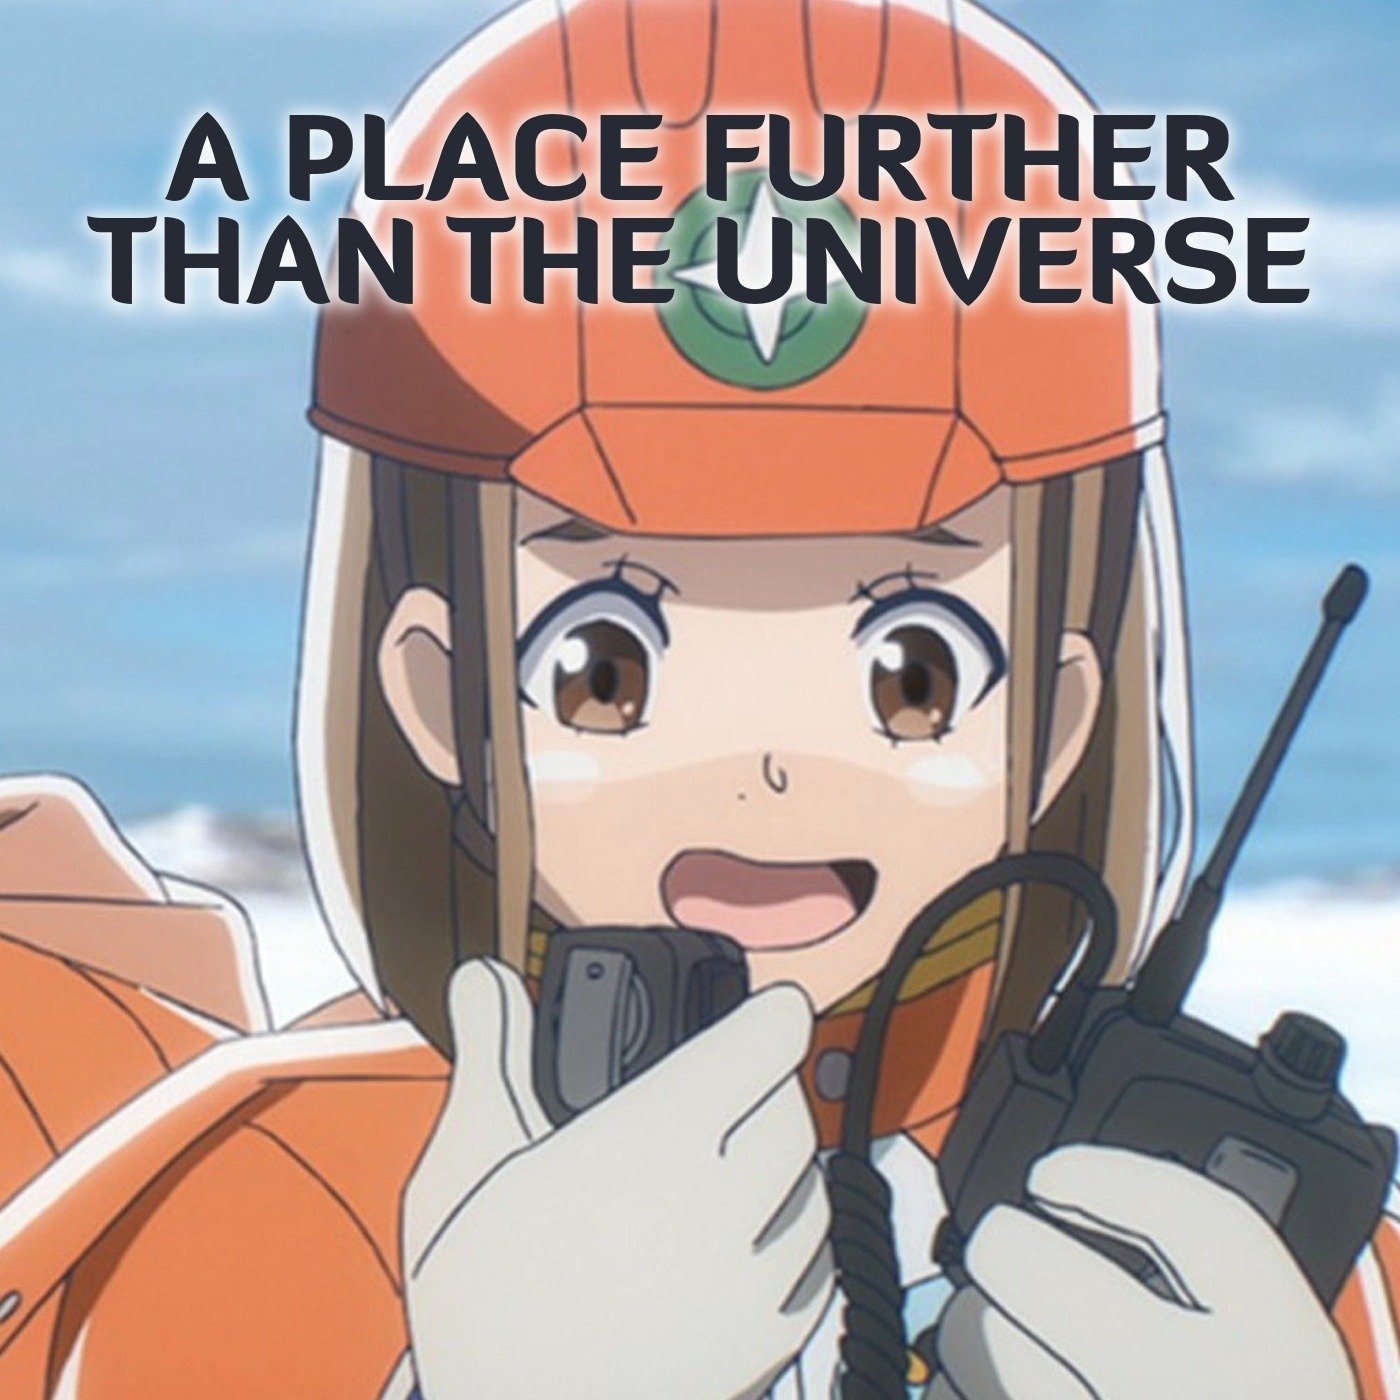 Anime Like A Place Further Than the Universe